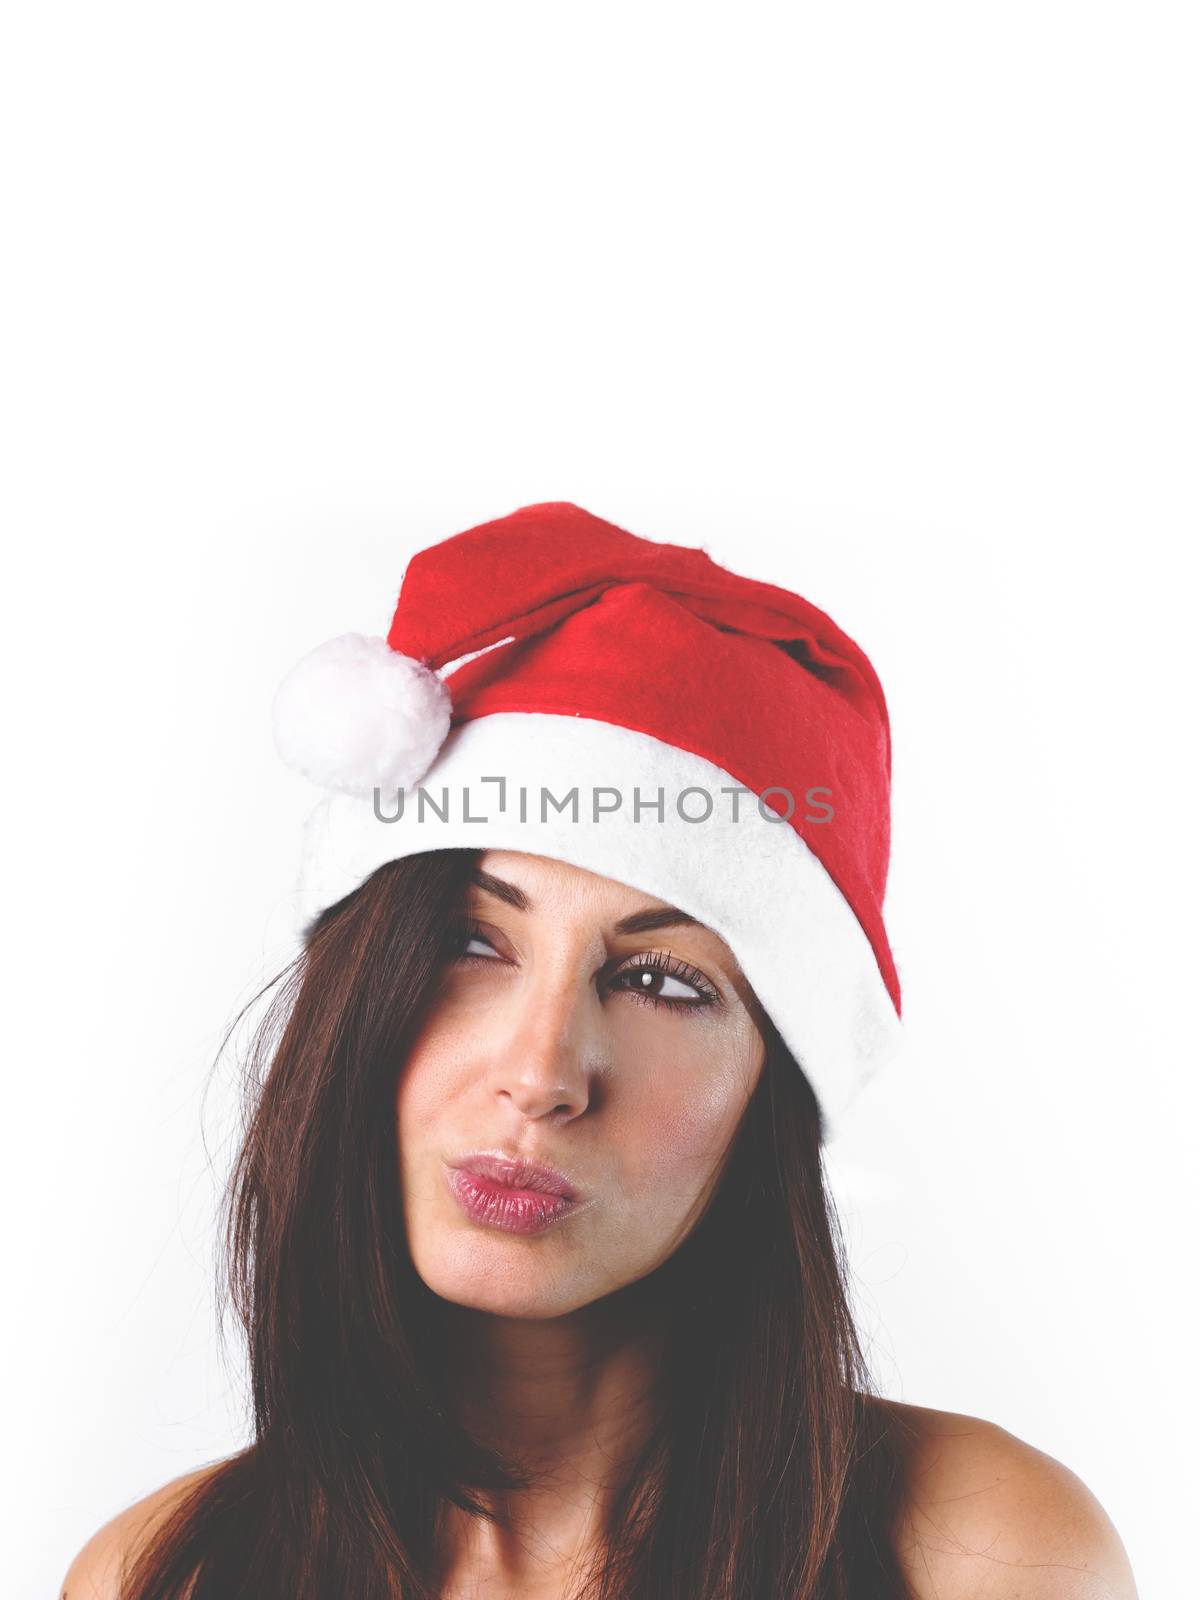 Girl with Christmas hat thinking an idea by germanopoli